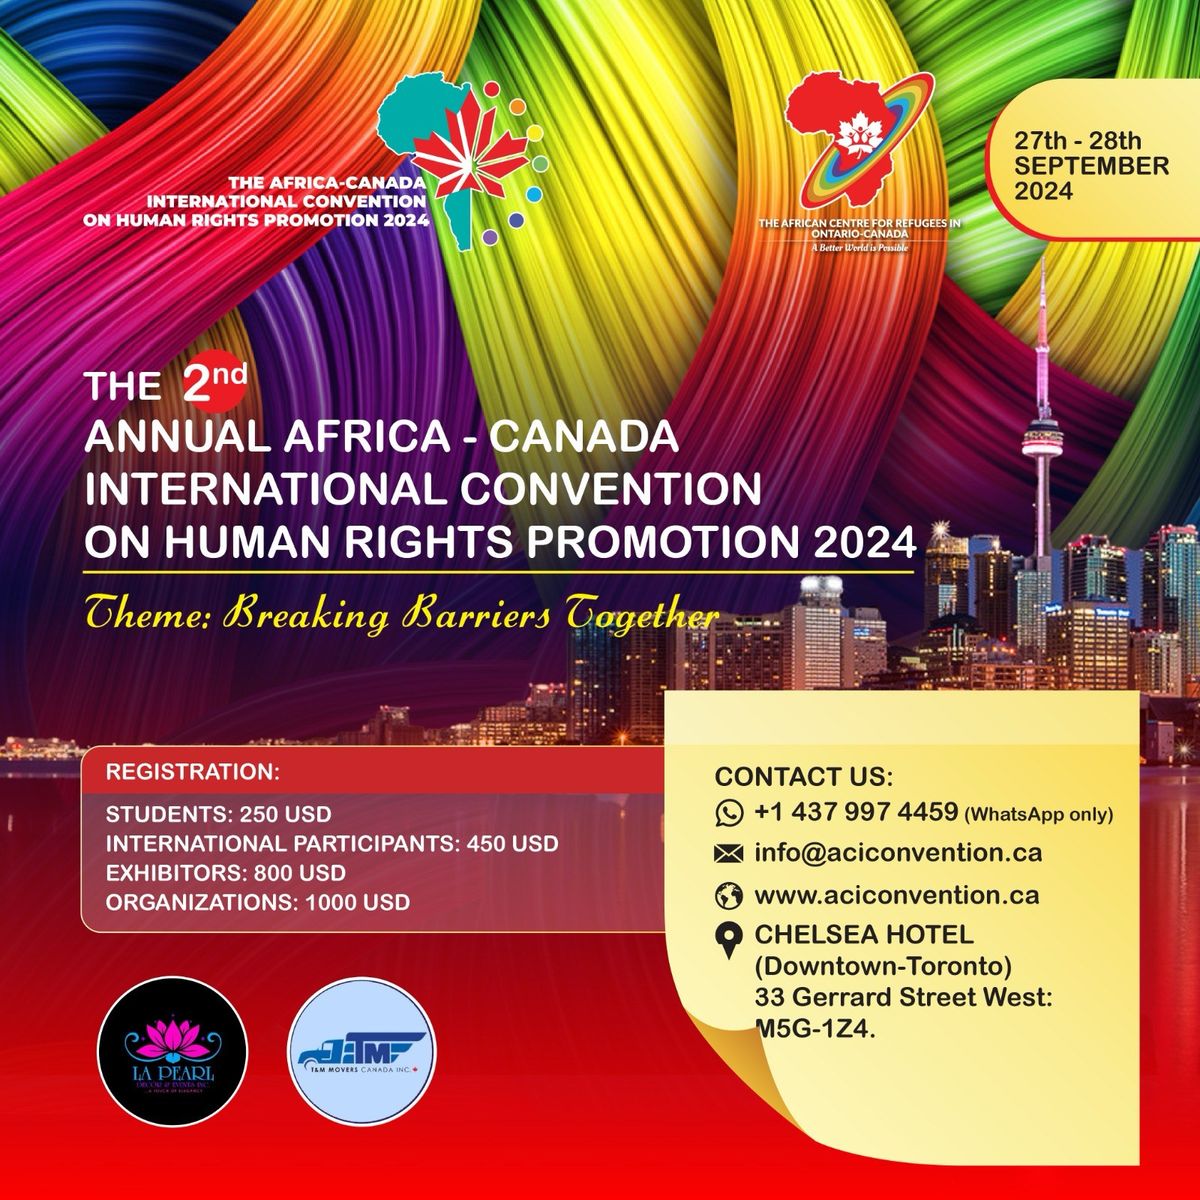 The Africa-Canada Convention on Human Rights Promotion's event